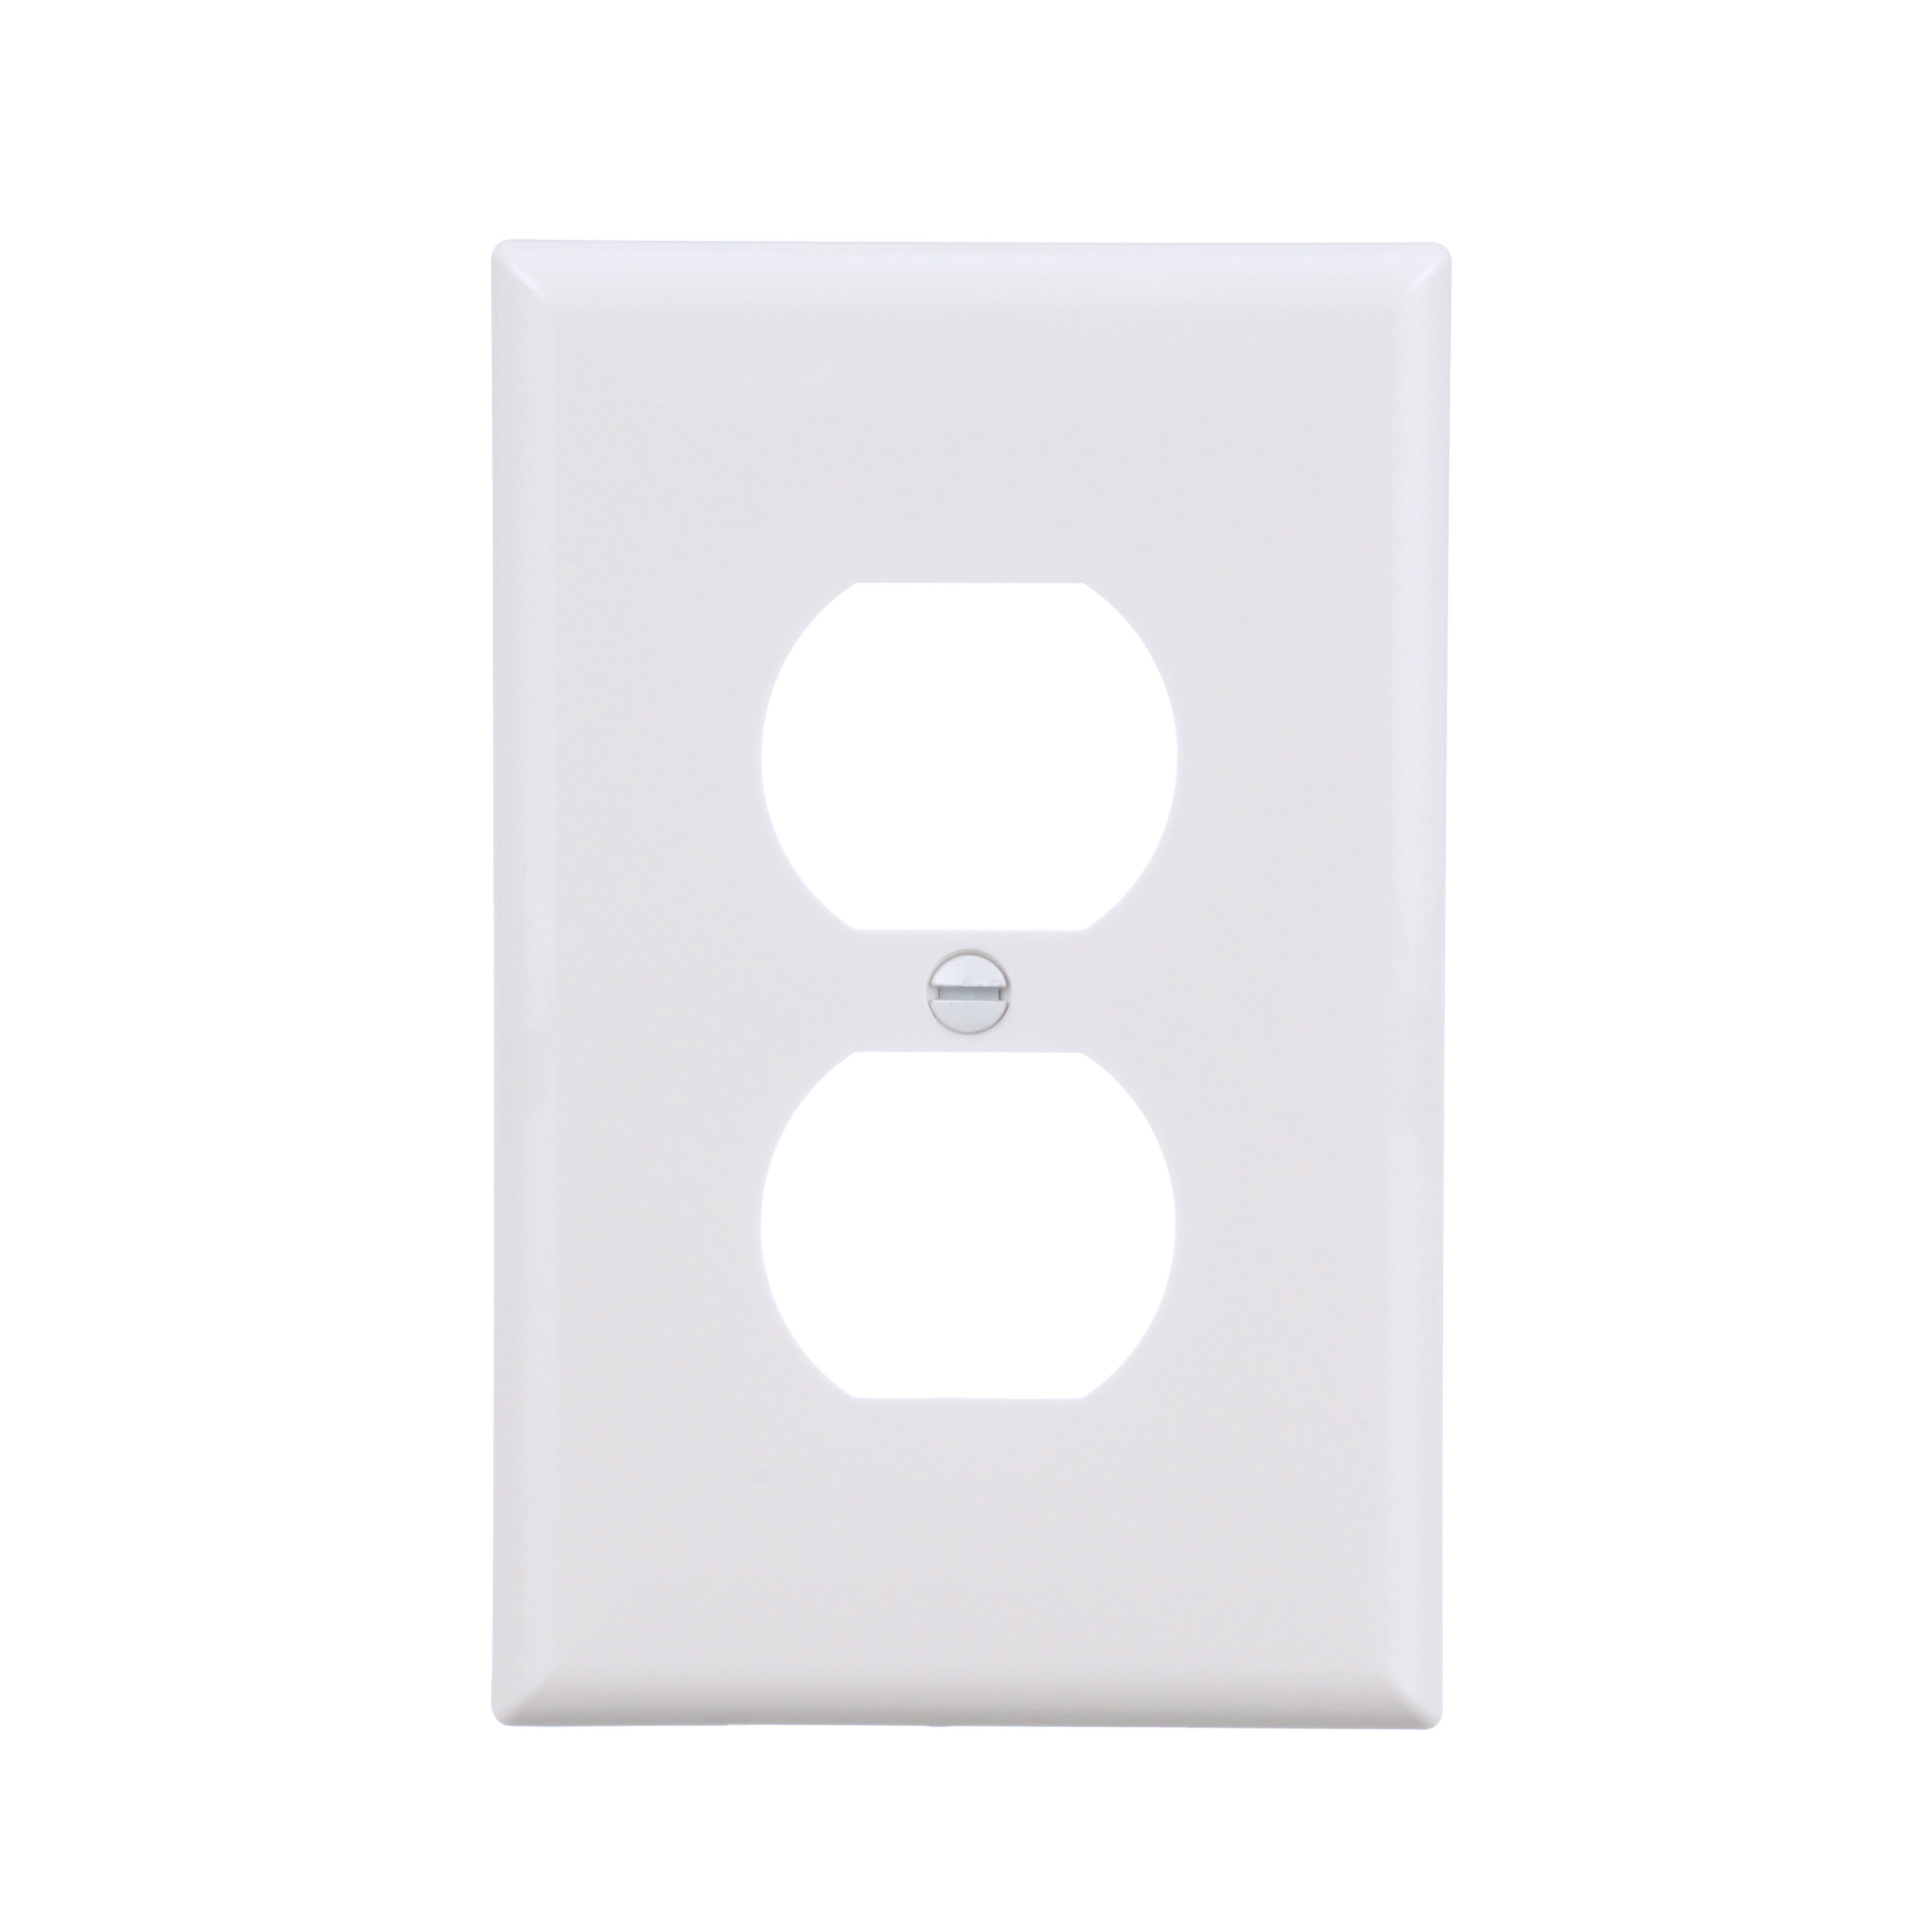 2 Cooper Commercial White Unbreakable Mid-Size 1G Blank Wallplate Covers PJ13W 